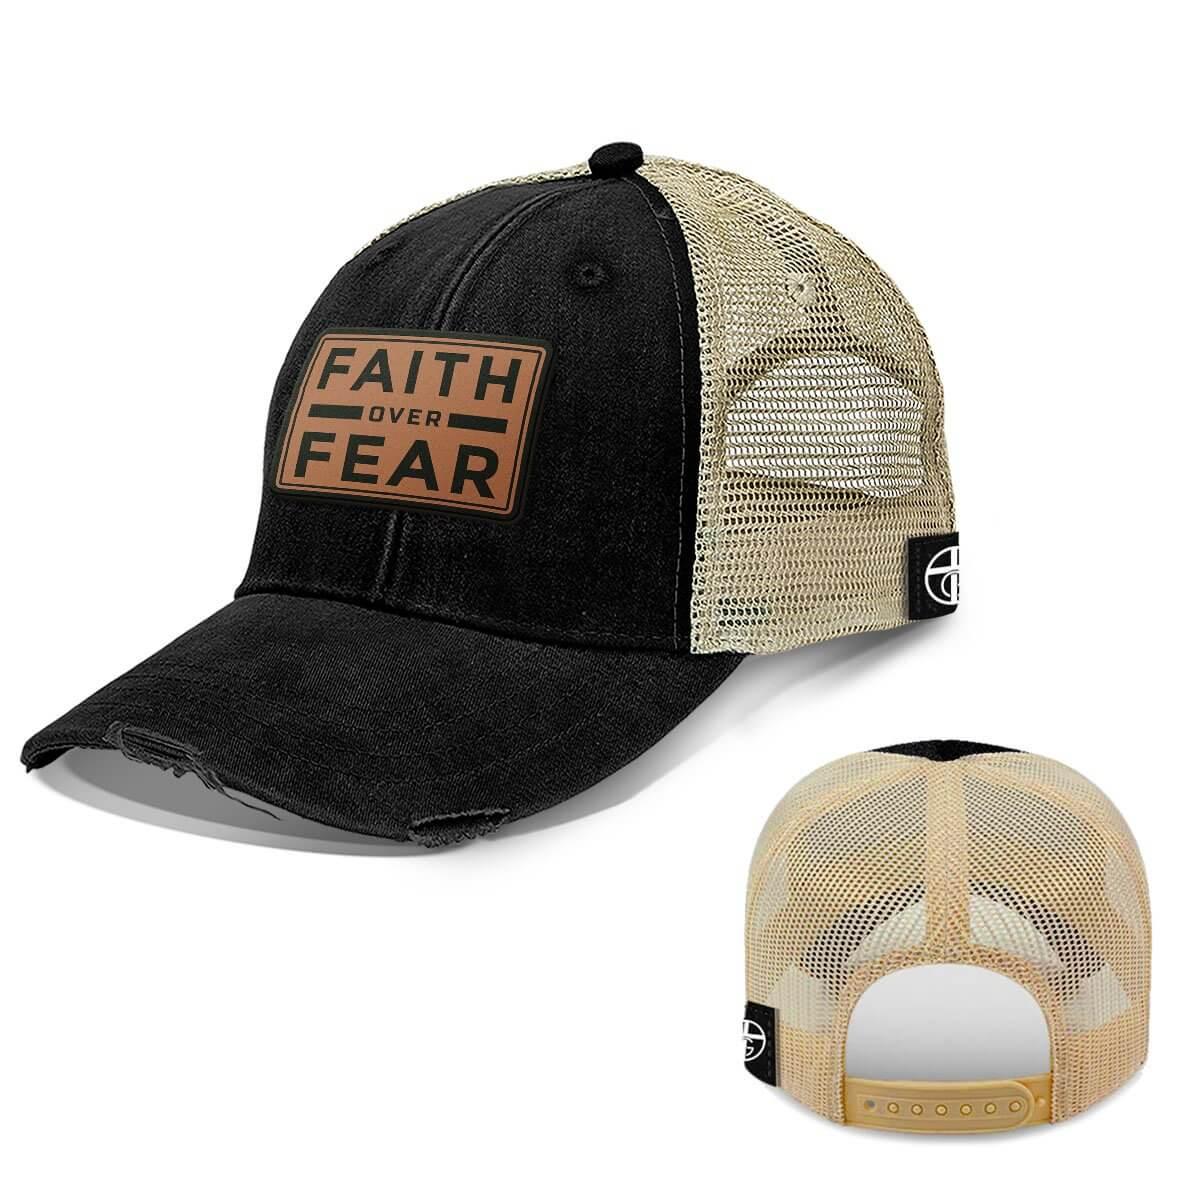 Faith Over Fear Trucker Leather Patch Hats